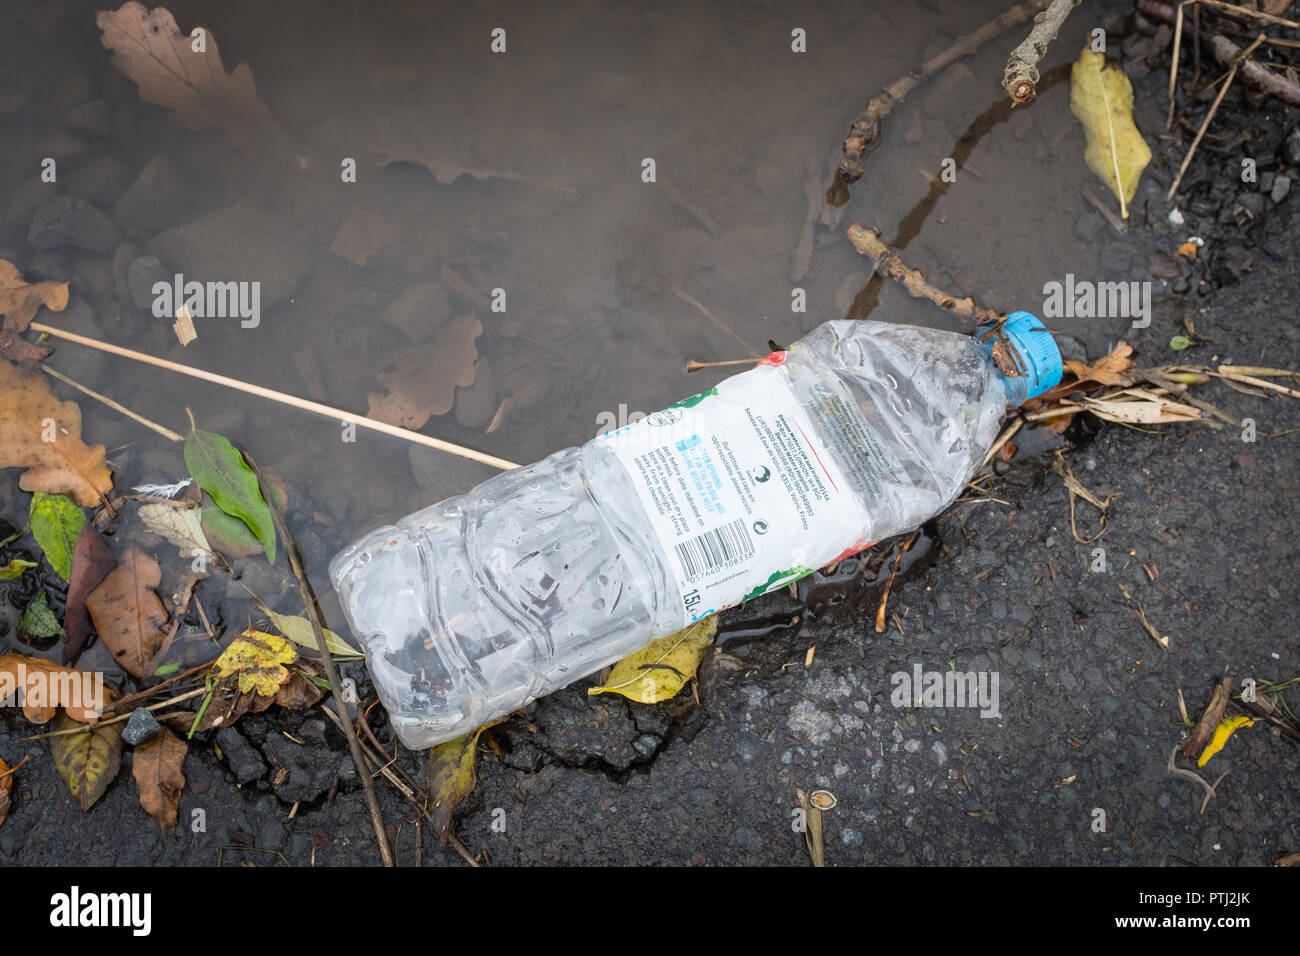 Discarded plastic bottle lying beside a puddle, showing careless disregard for the environment. Stock Photo